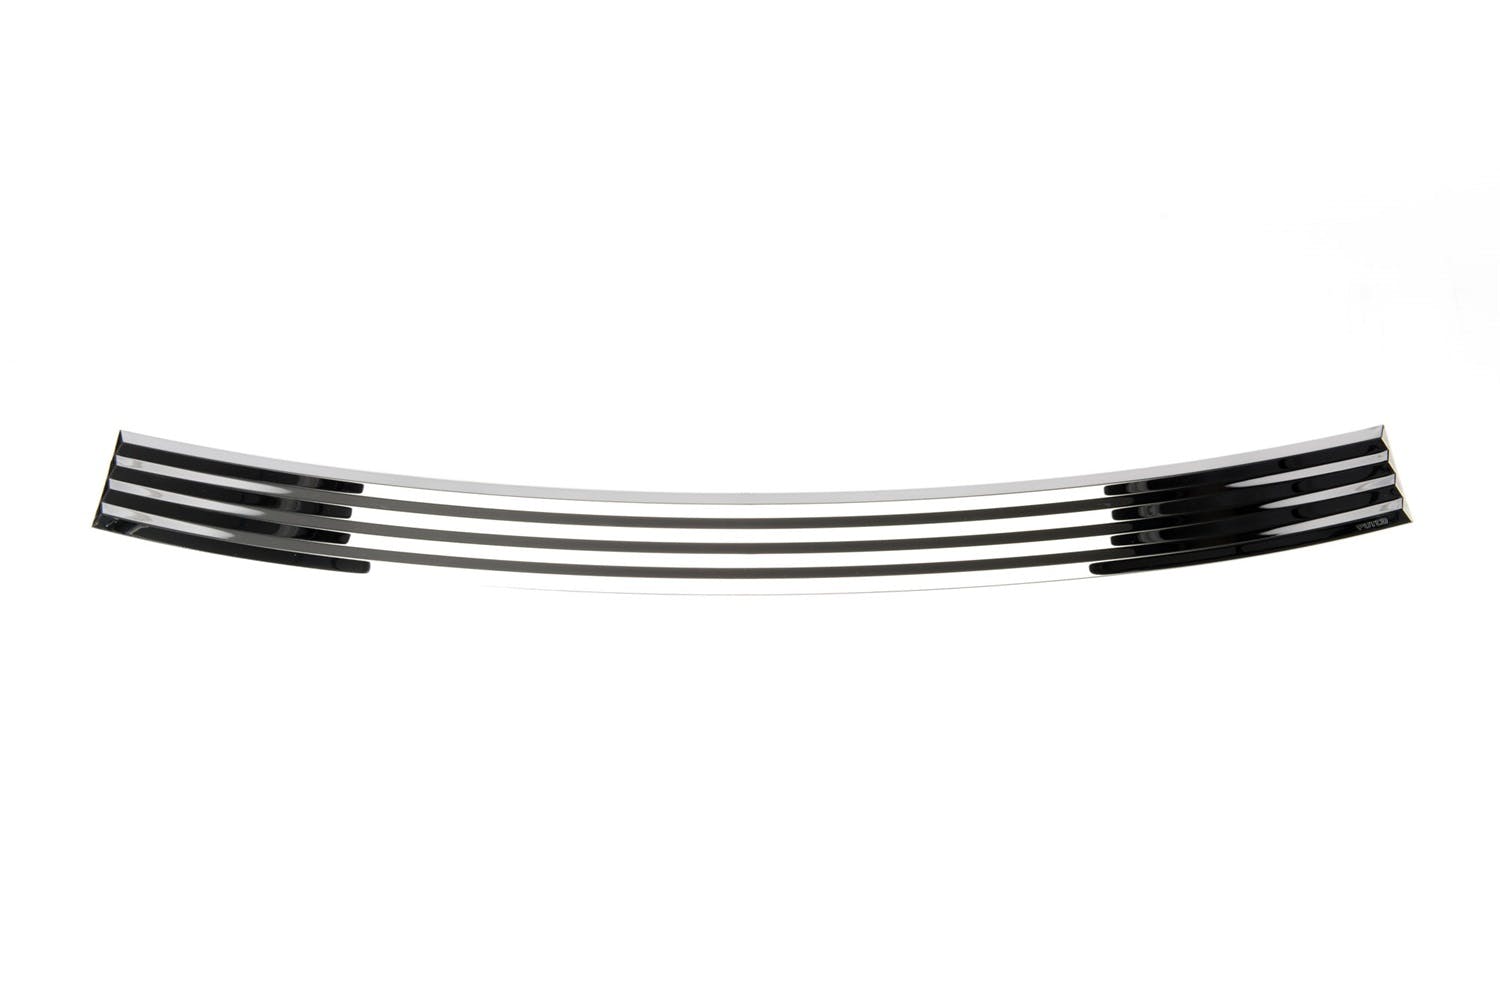 Putco 94100 Stainless Steel Bumper Covers